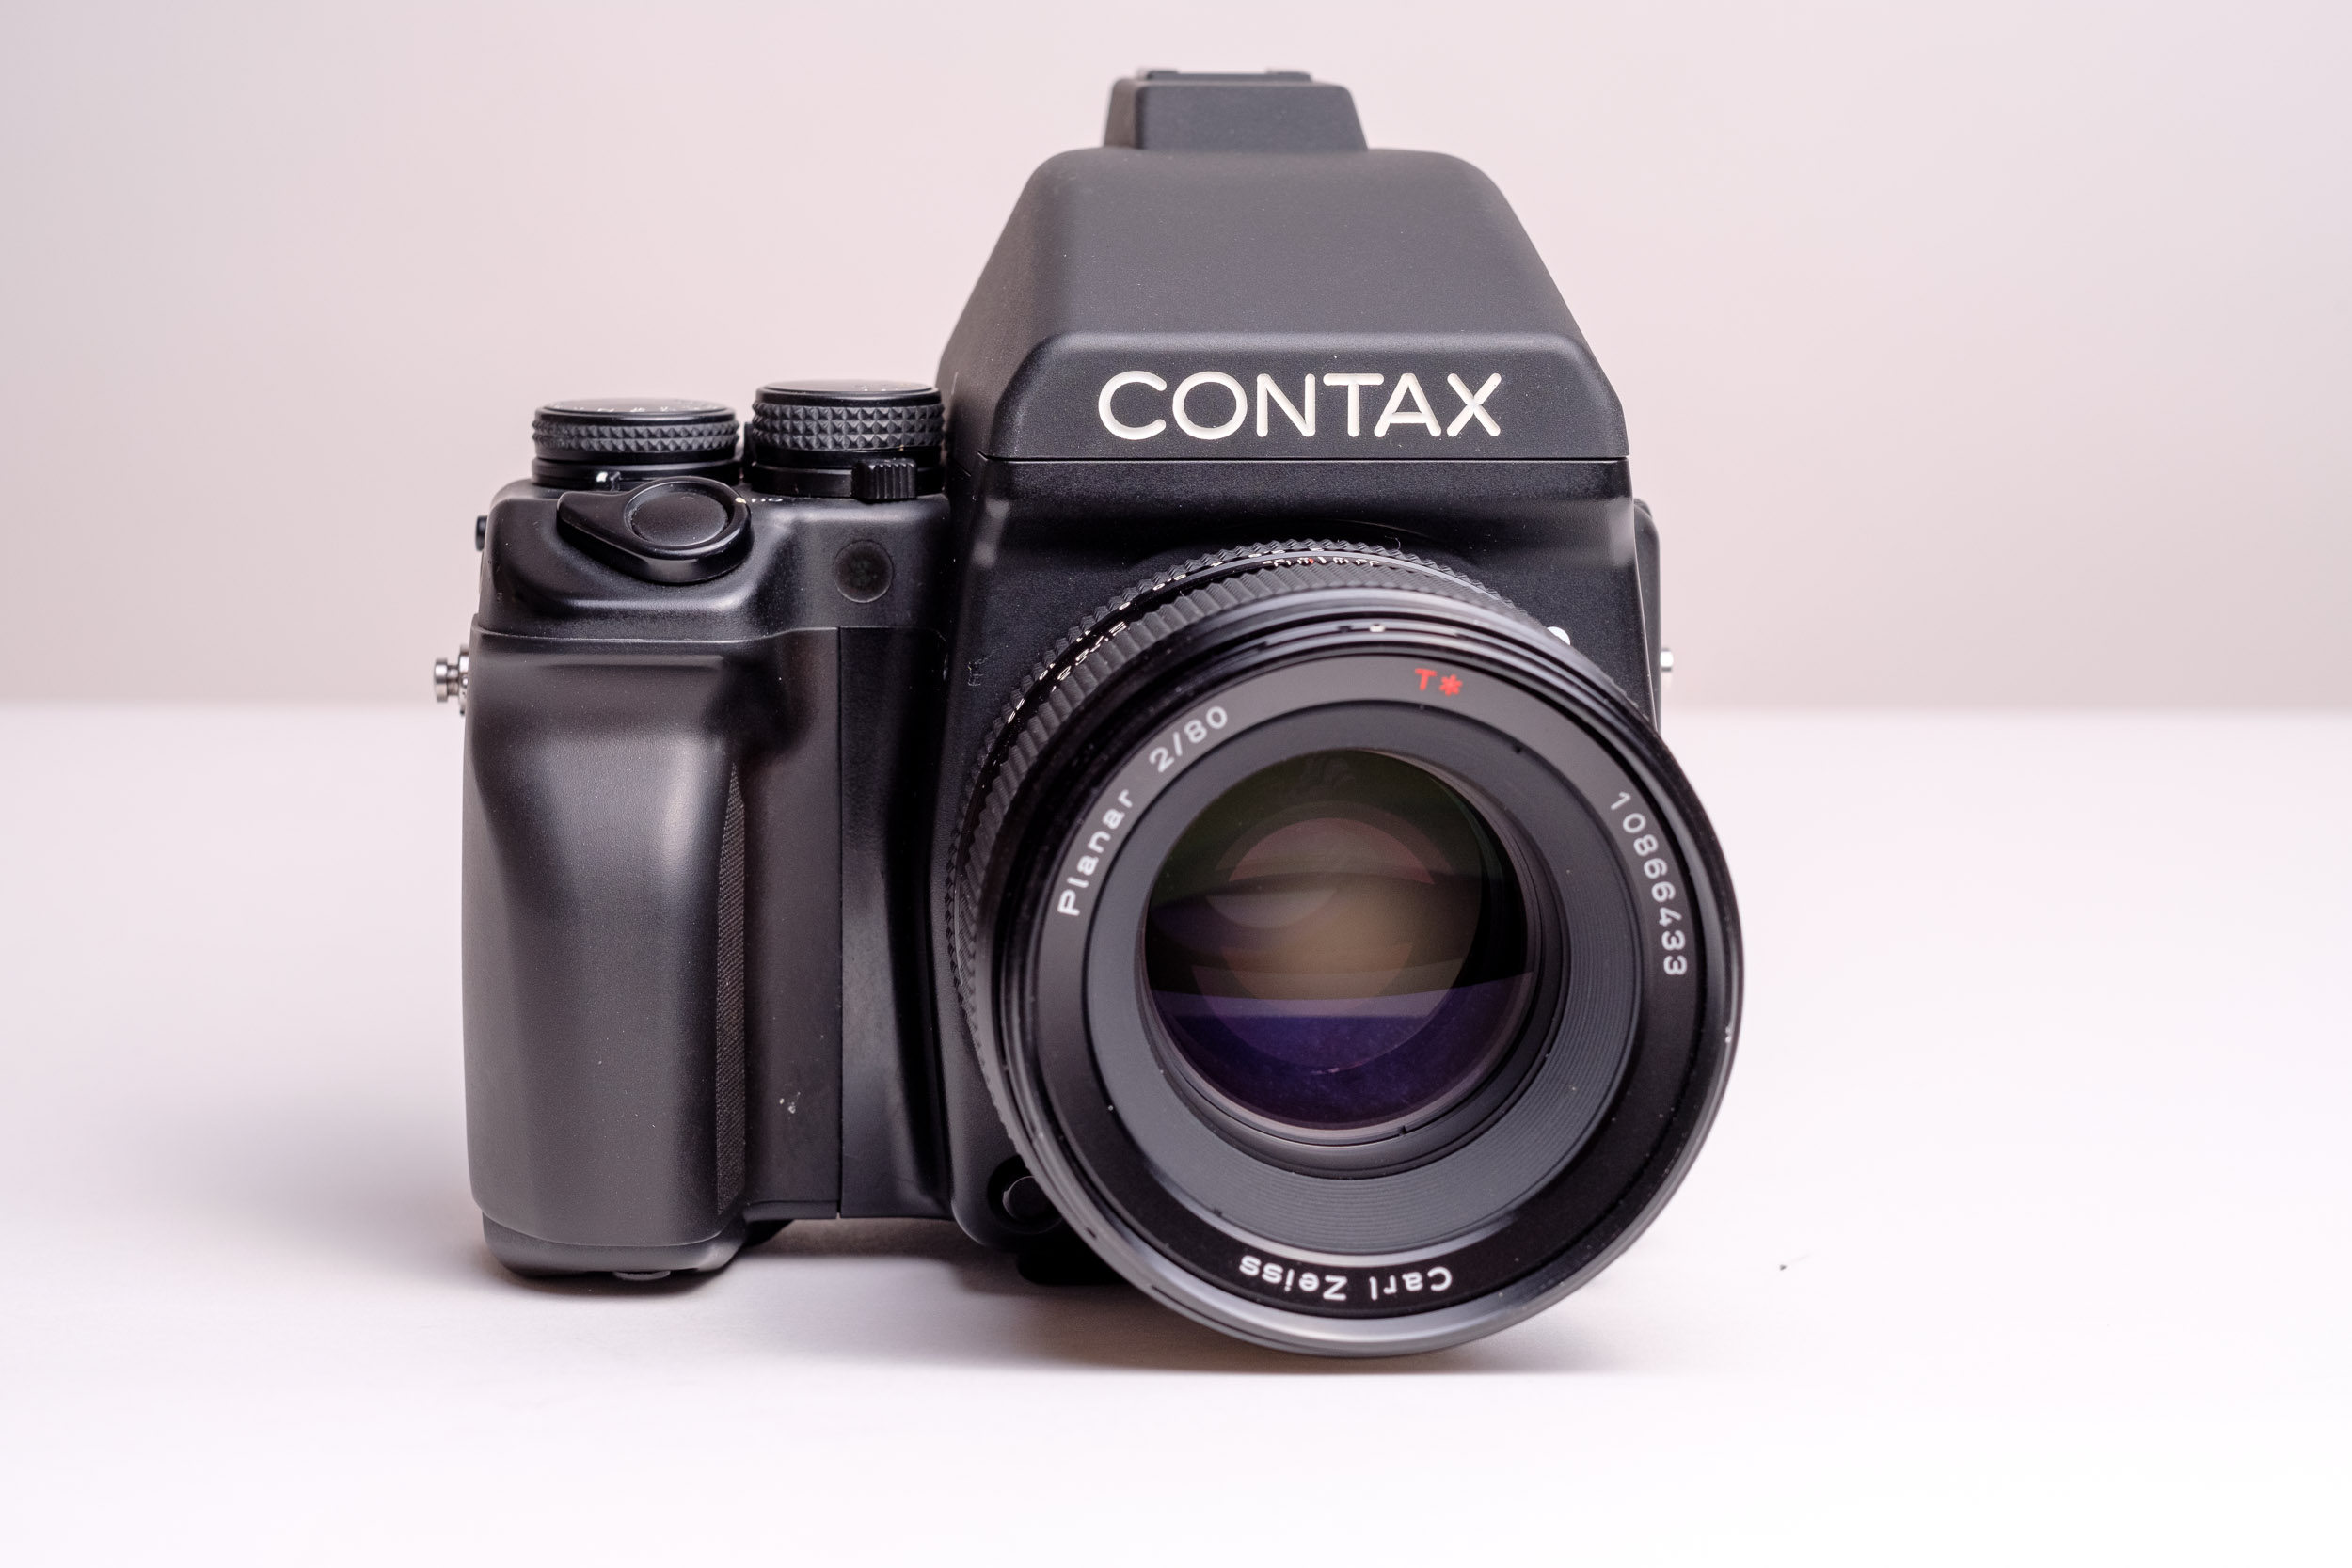 I'm selling my Contax 645 camera. 